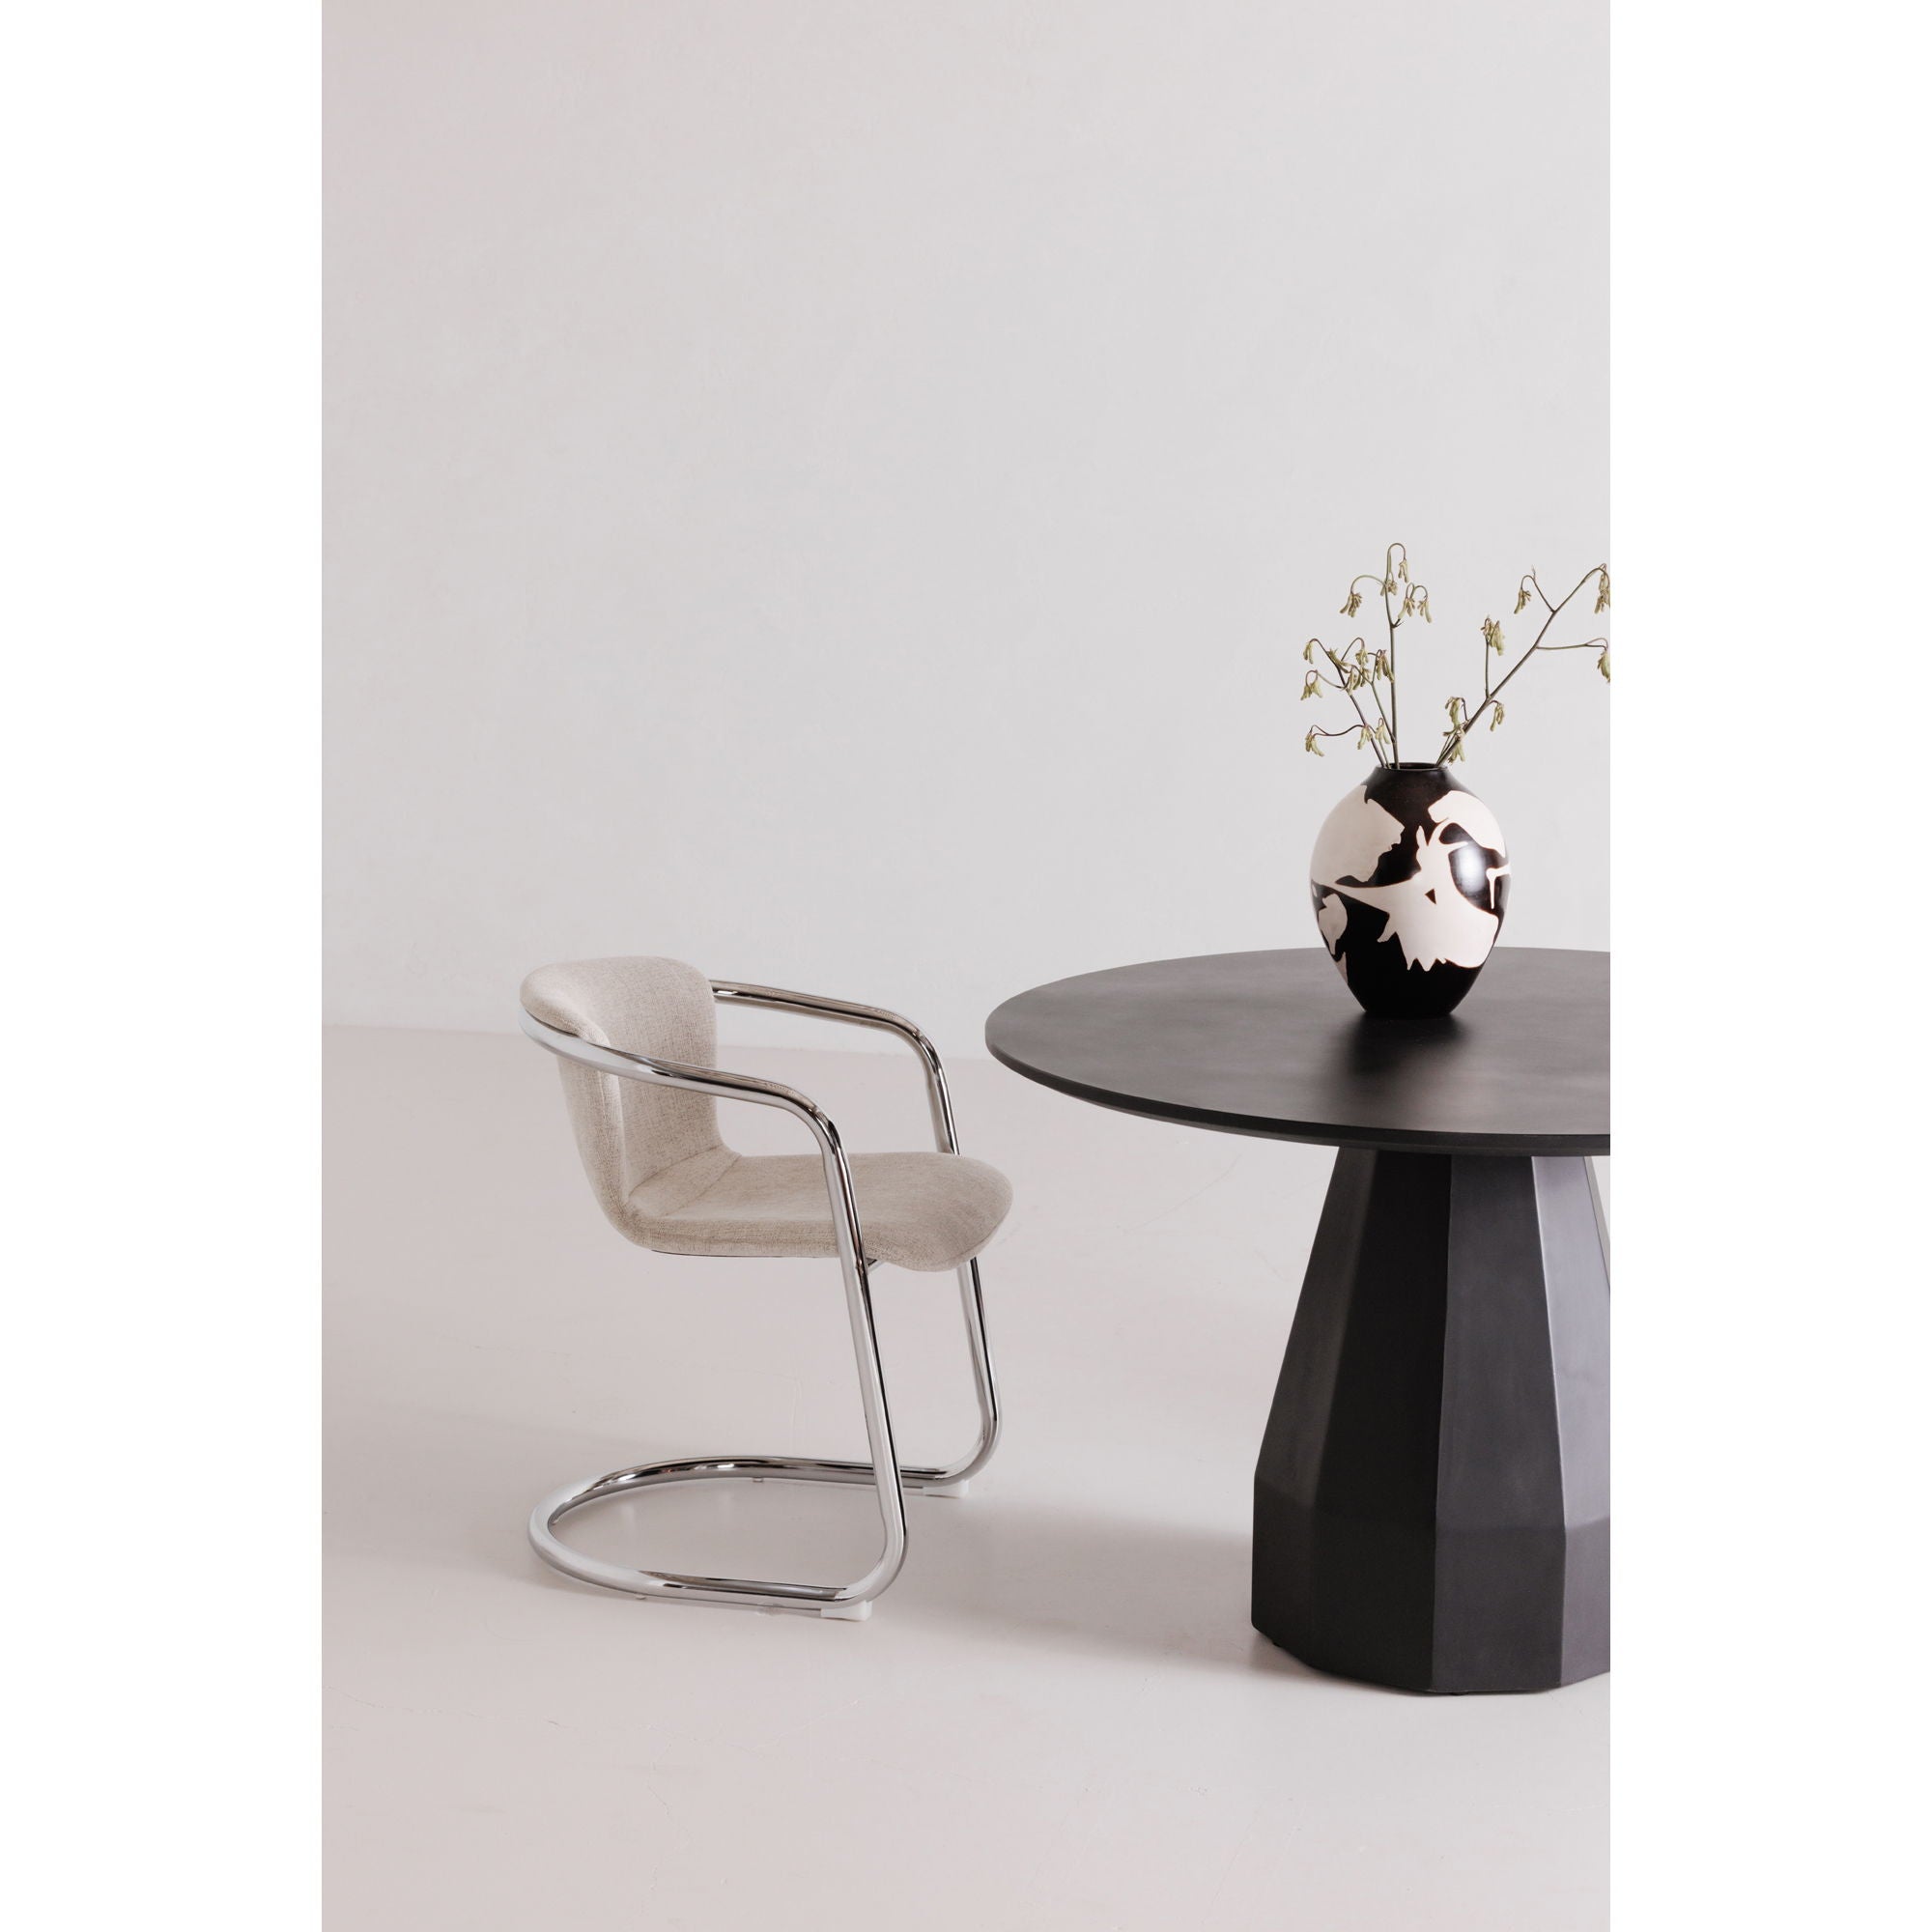 Templo - Outdoor Dining Table - Black - Concrete